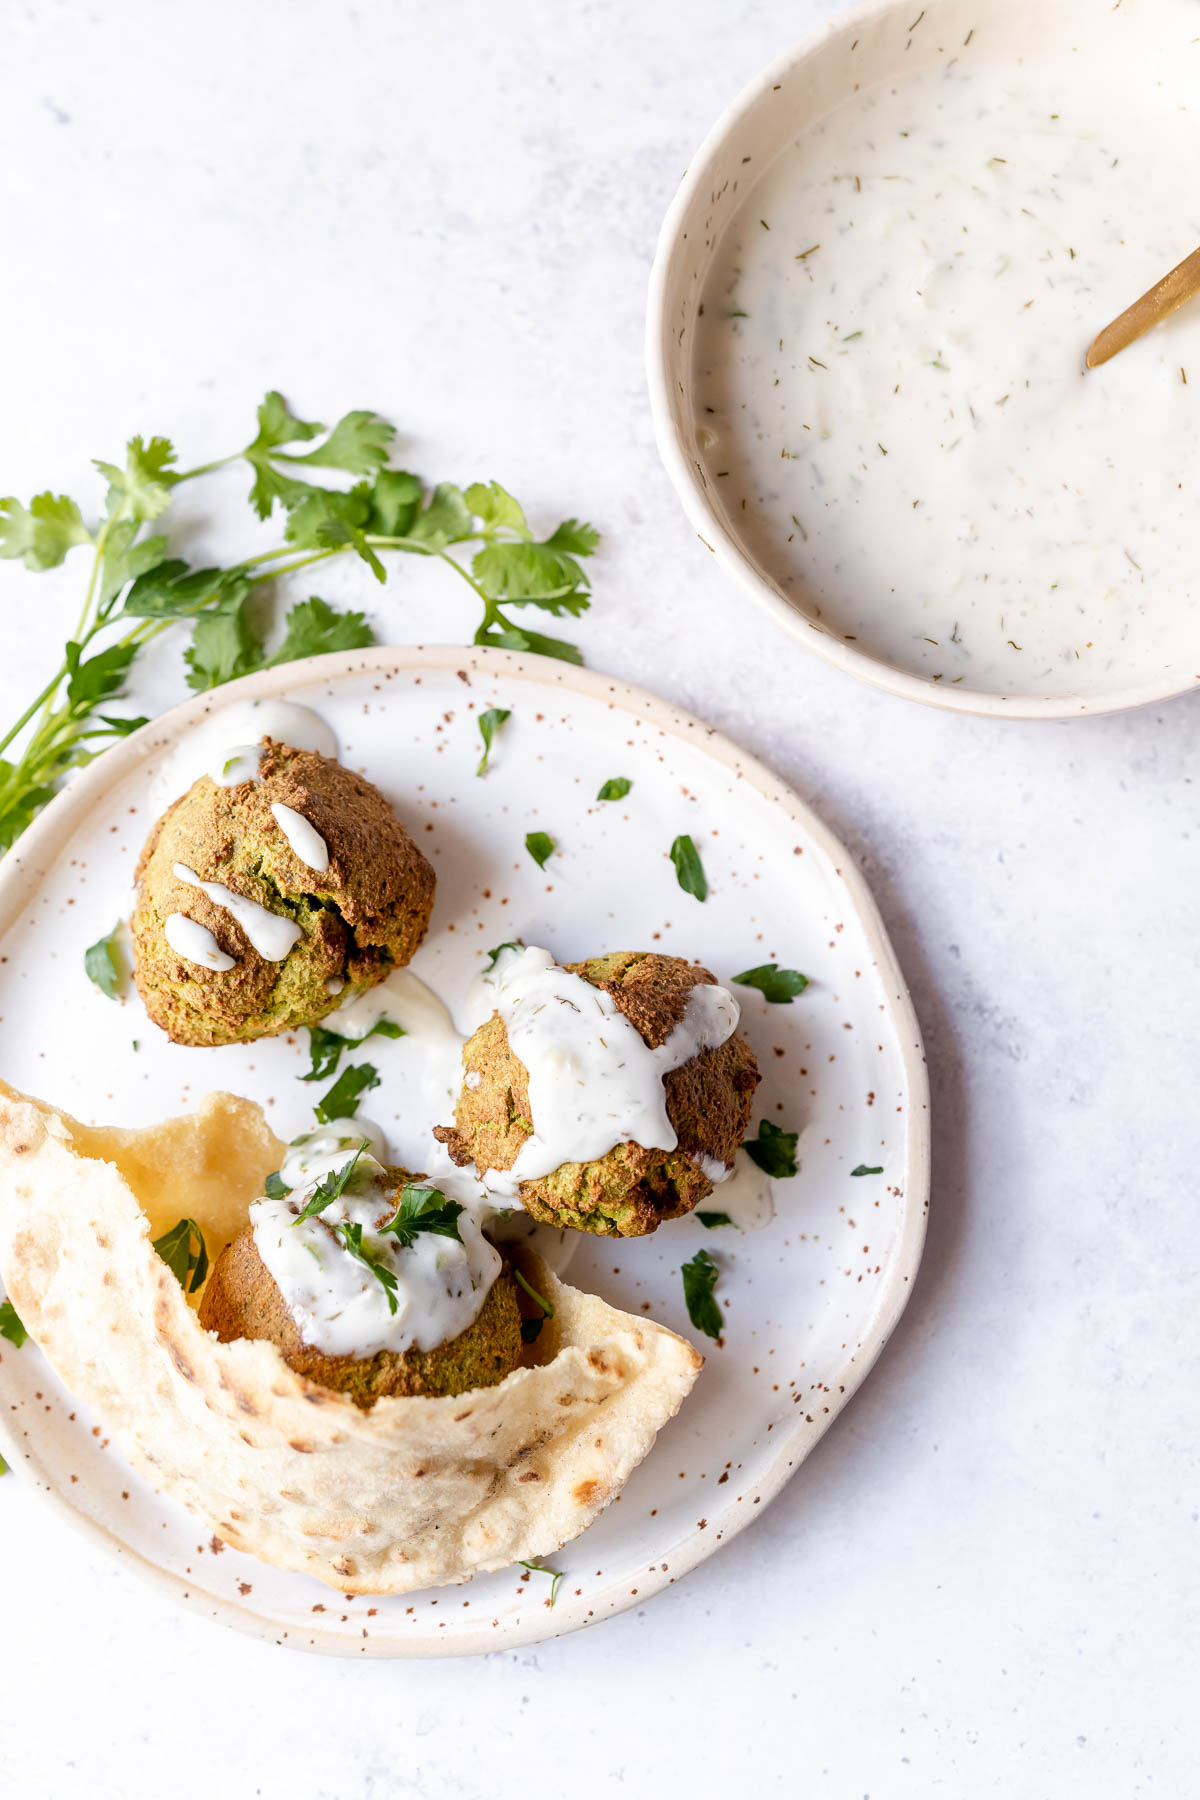 Top view of a white plate topped with golden falafel, fresh green herbs, white tzatziki sauce and pita bread.